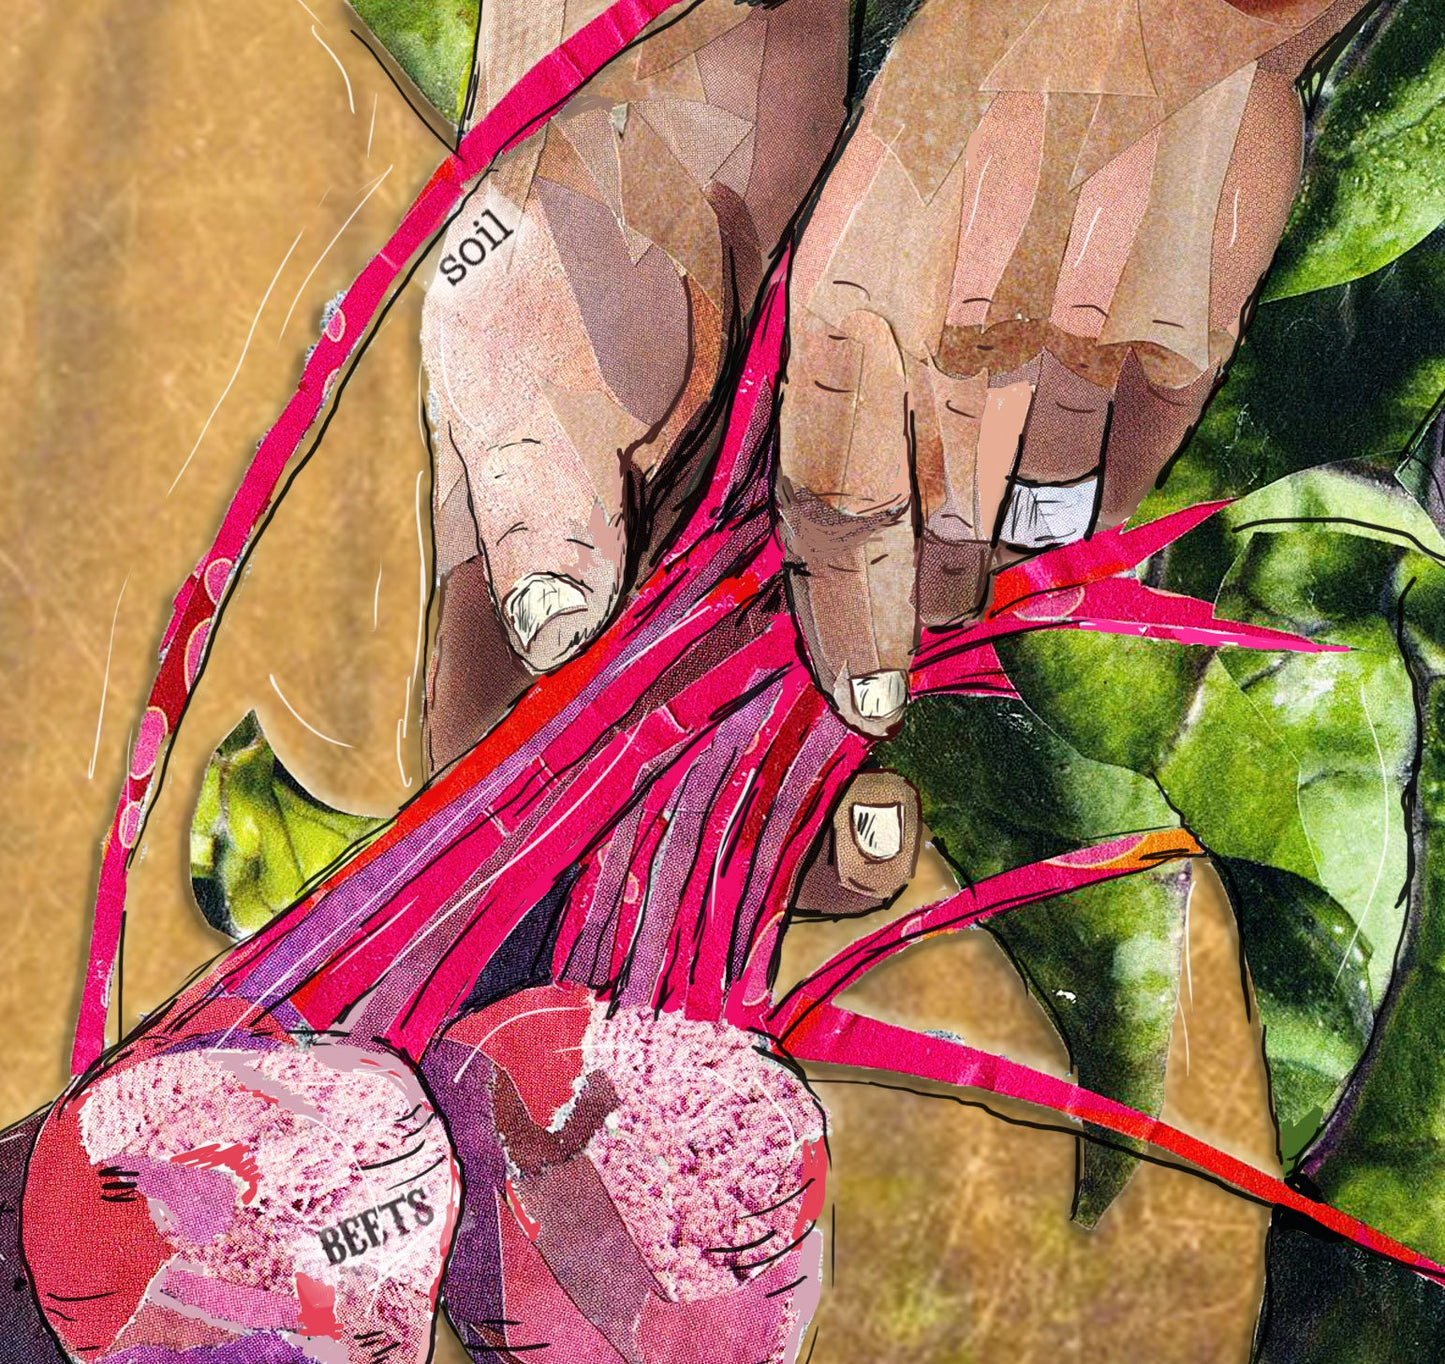 Greeting Card of mixed media collage of a hands holding beets, gardening, farming - Blank Inside